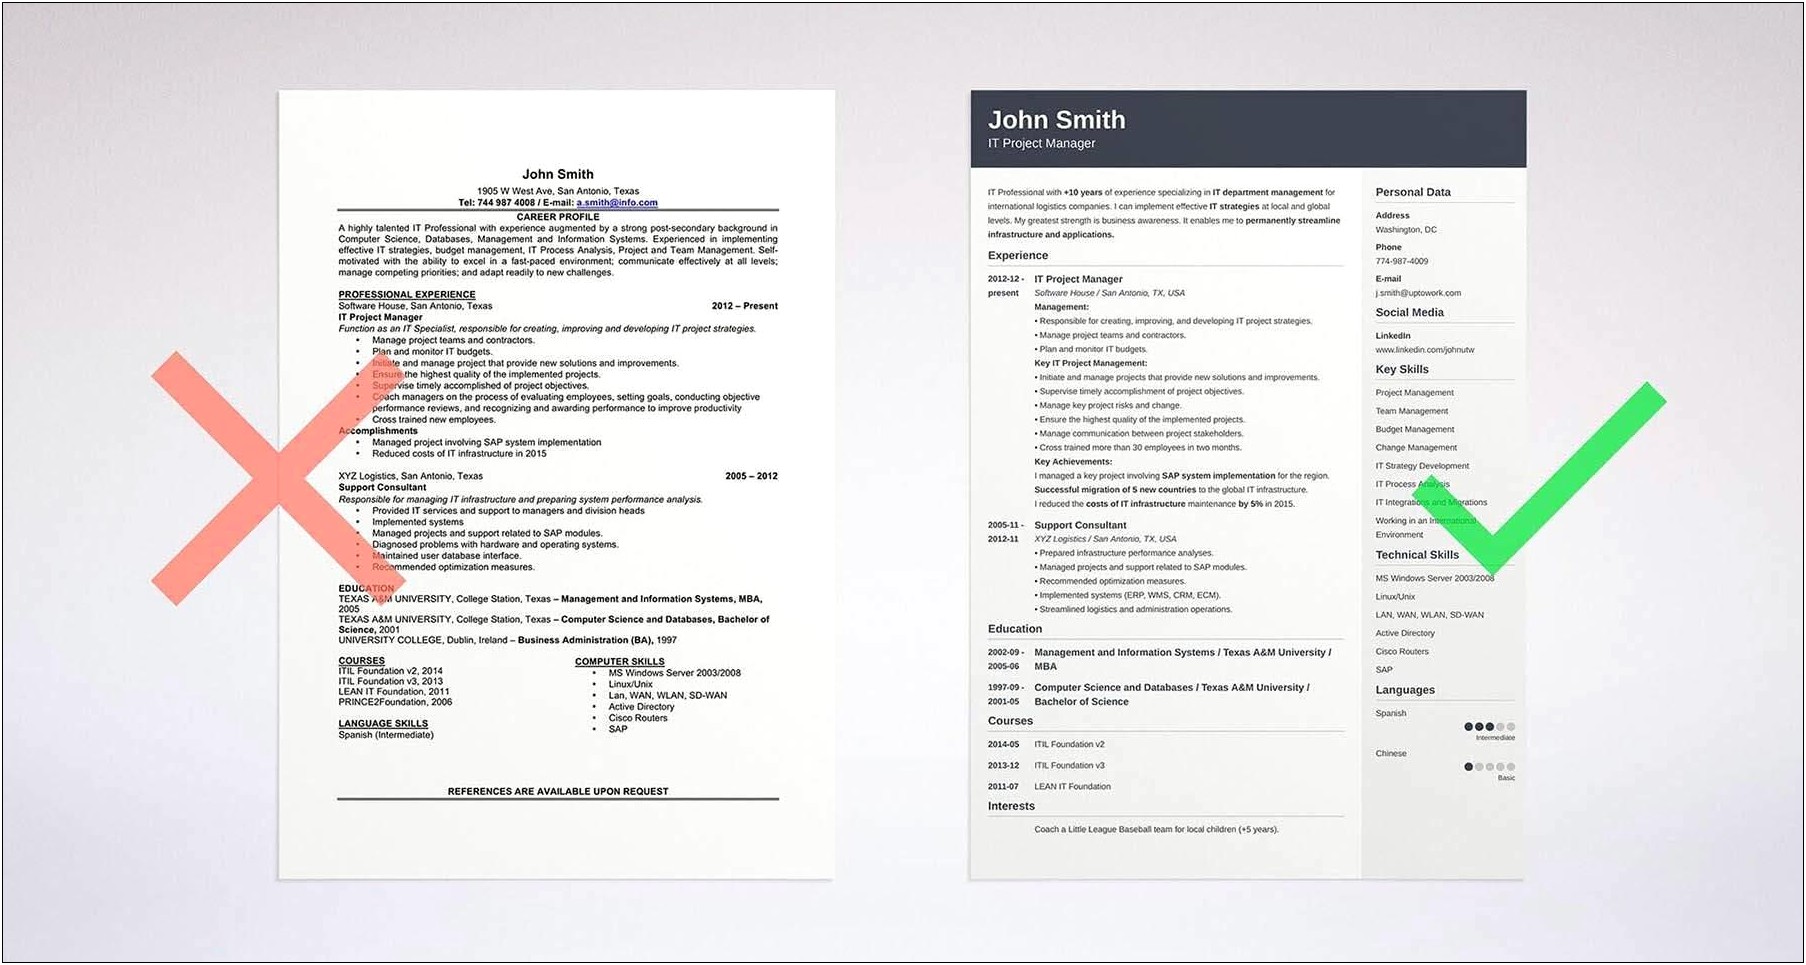 Resume Objective Examples For It Jobs